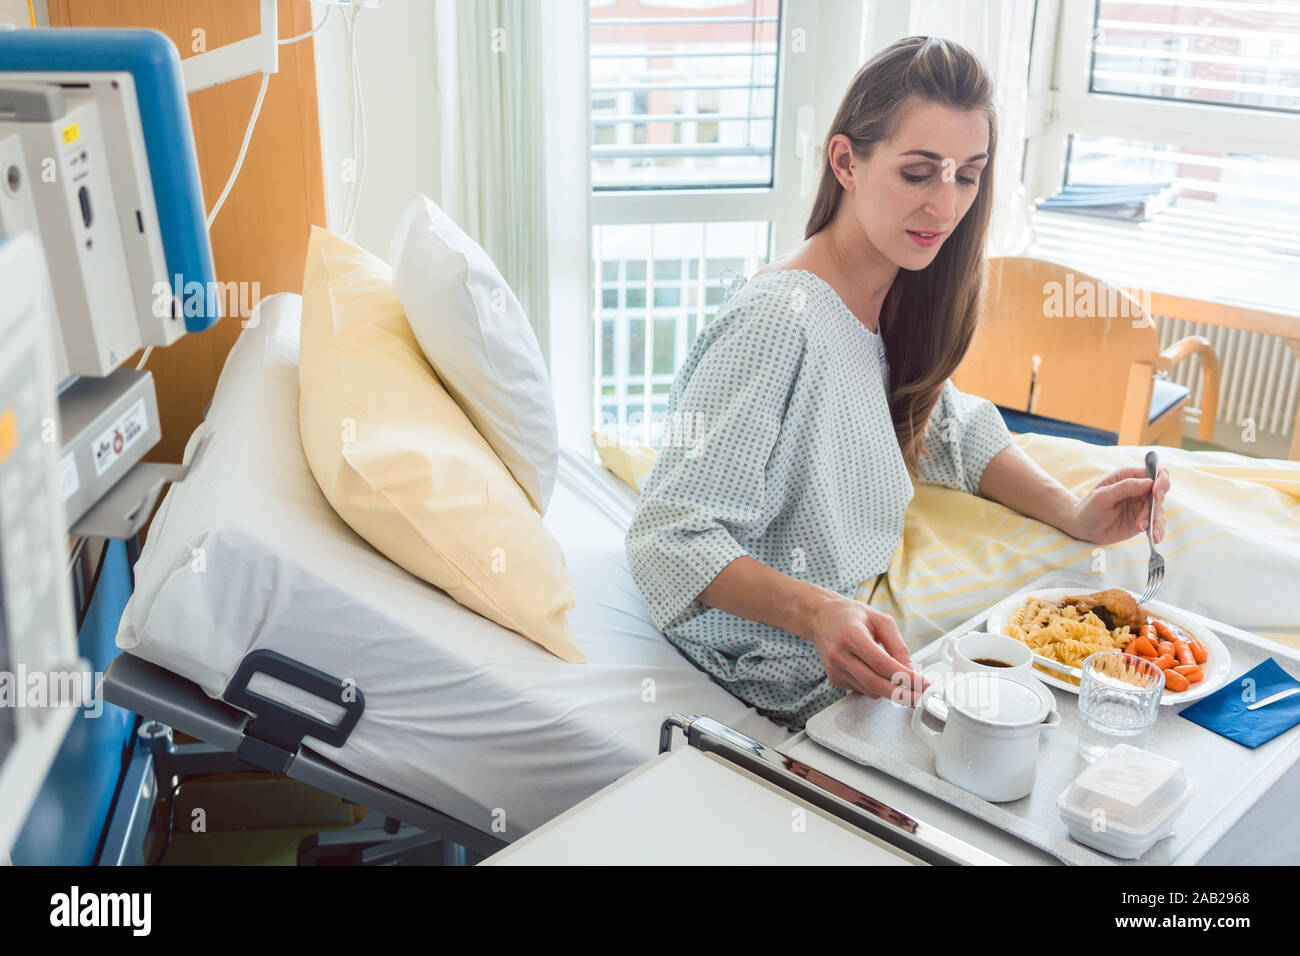 Patient in hospital lying in bed eating meal Stock Photo